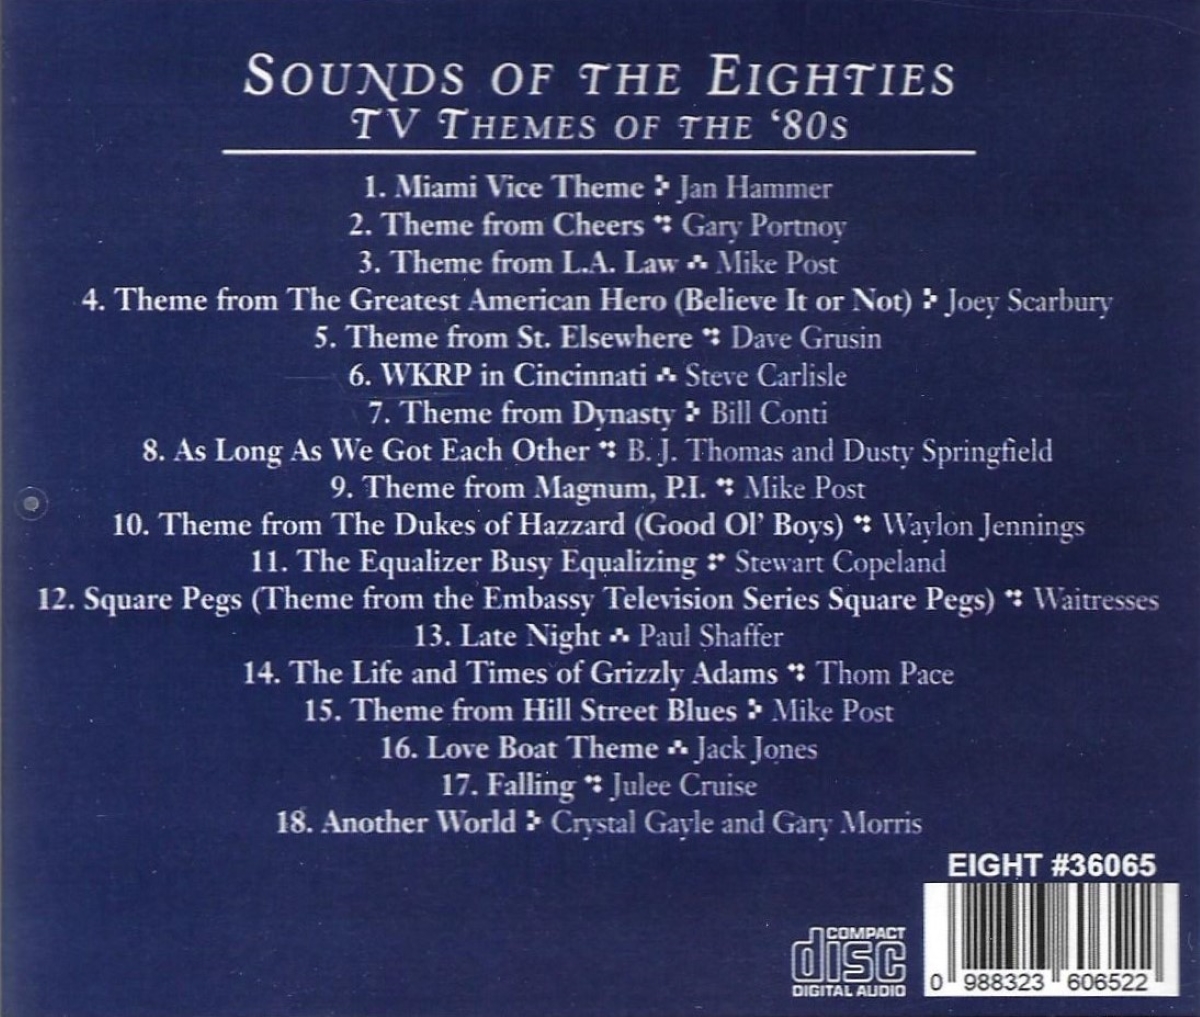 Sounds Of The Eighties-TV Themes Of The '80s